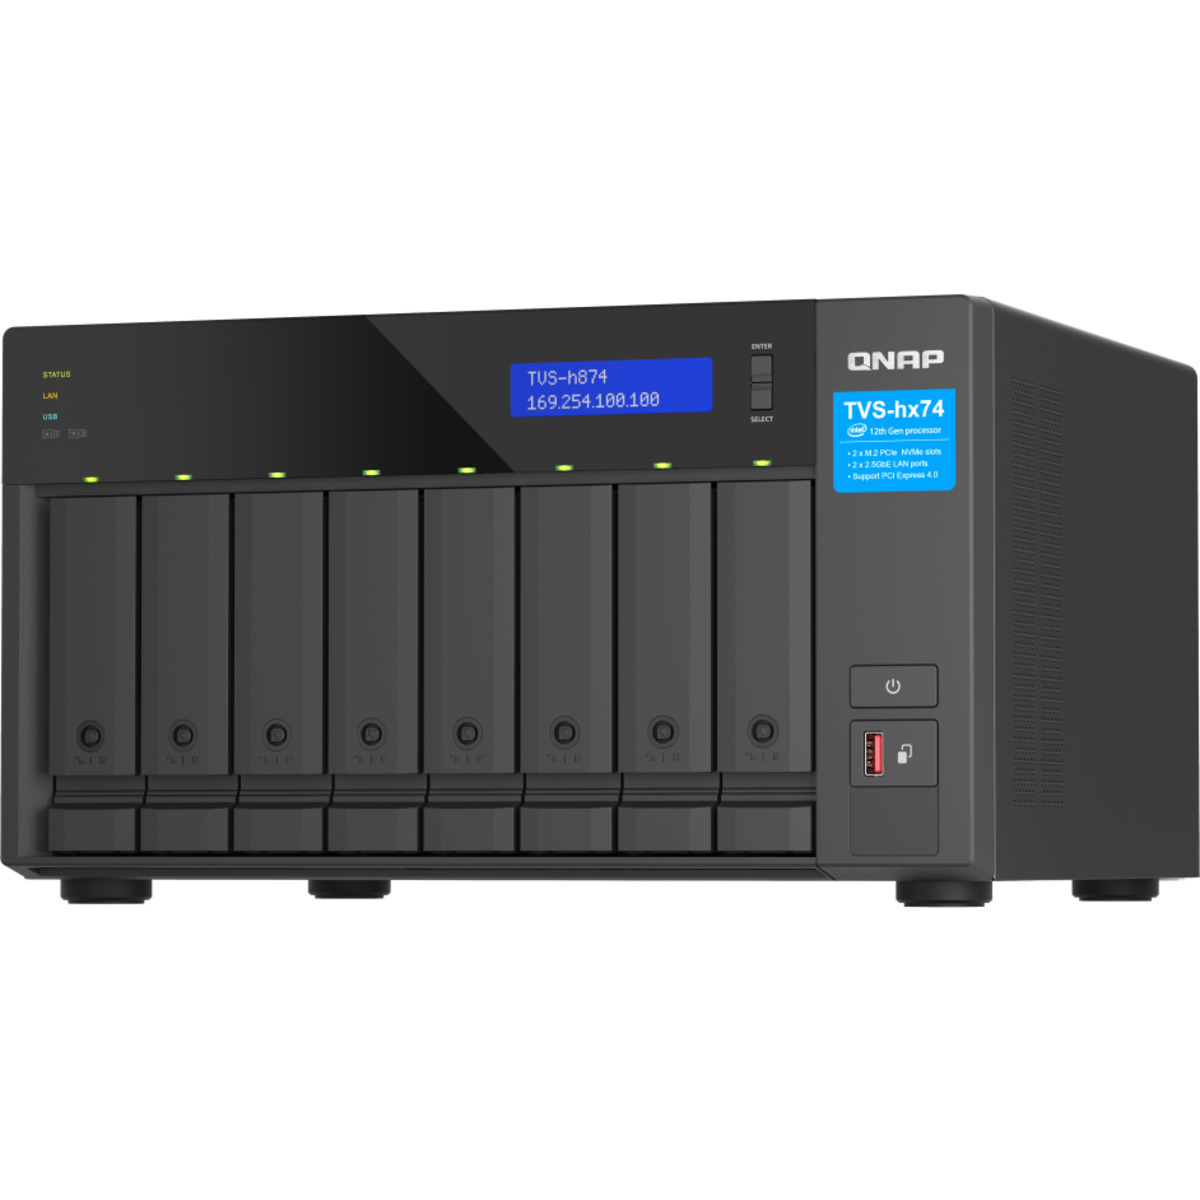 QNAP TVS-h874 Core i7 112tb 8-Bay Desktop Multimedia / Power User / Business NAS - Network Attached Storage Device 8x14tb Toshiba Enterprise Capacity MG07ACA14TE 3.5 7200rpm SATA 6Gb/s HDD ENTERPRISE Class Drives Installed - Burn-In Tested TVS-h874 Core i7